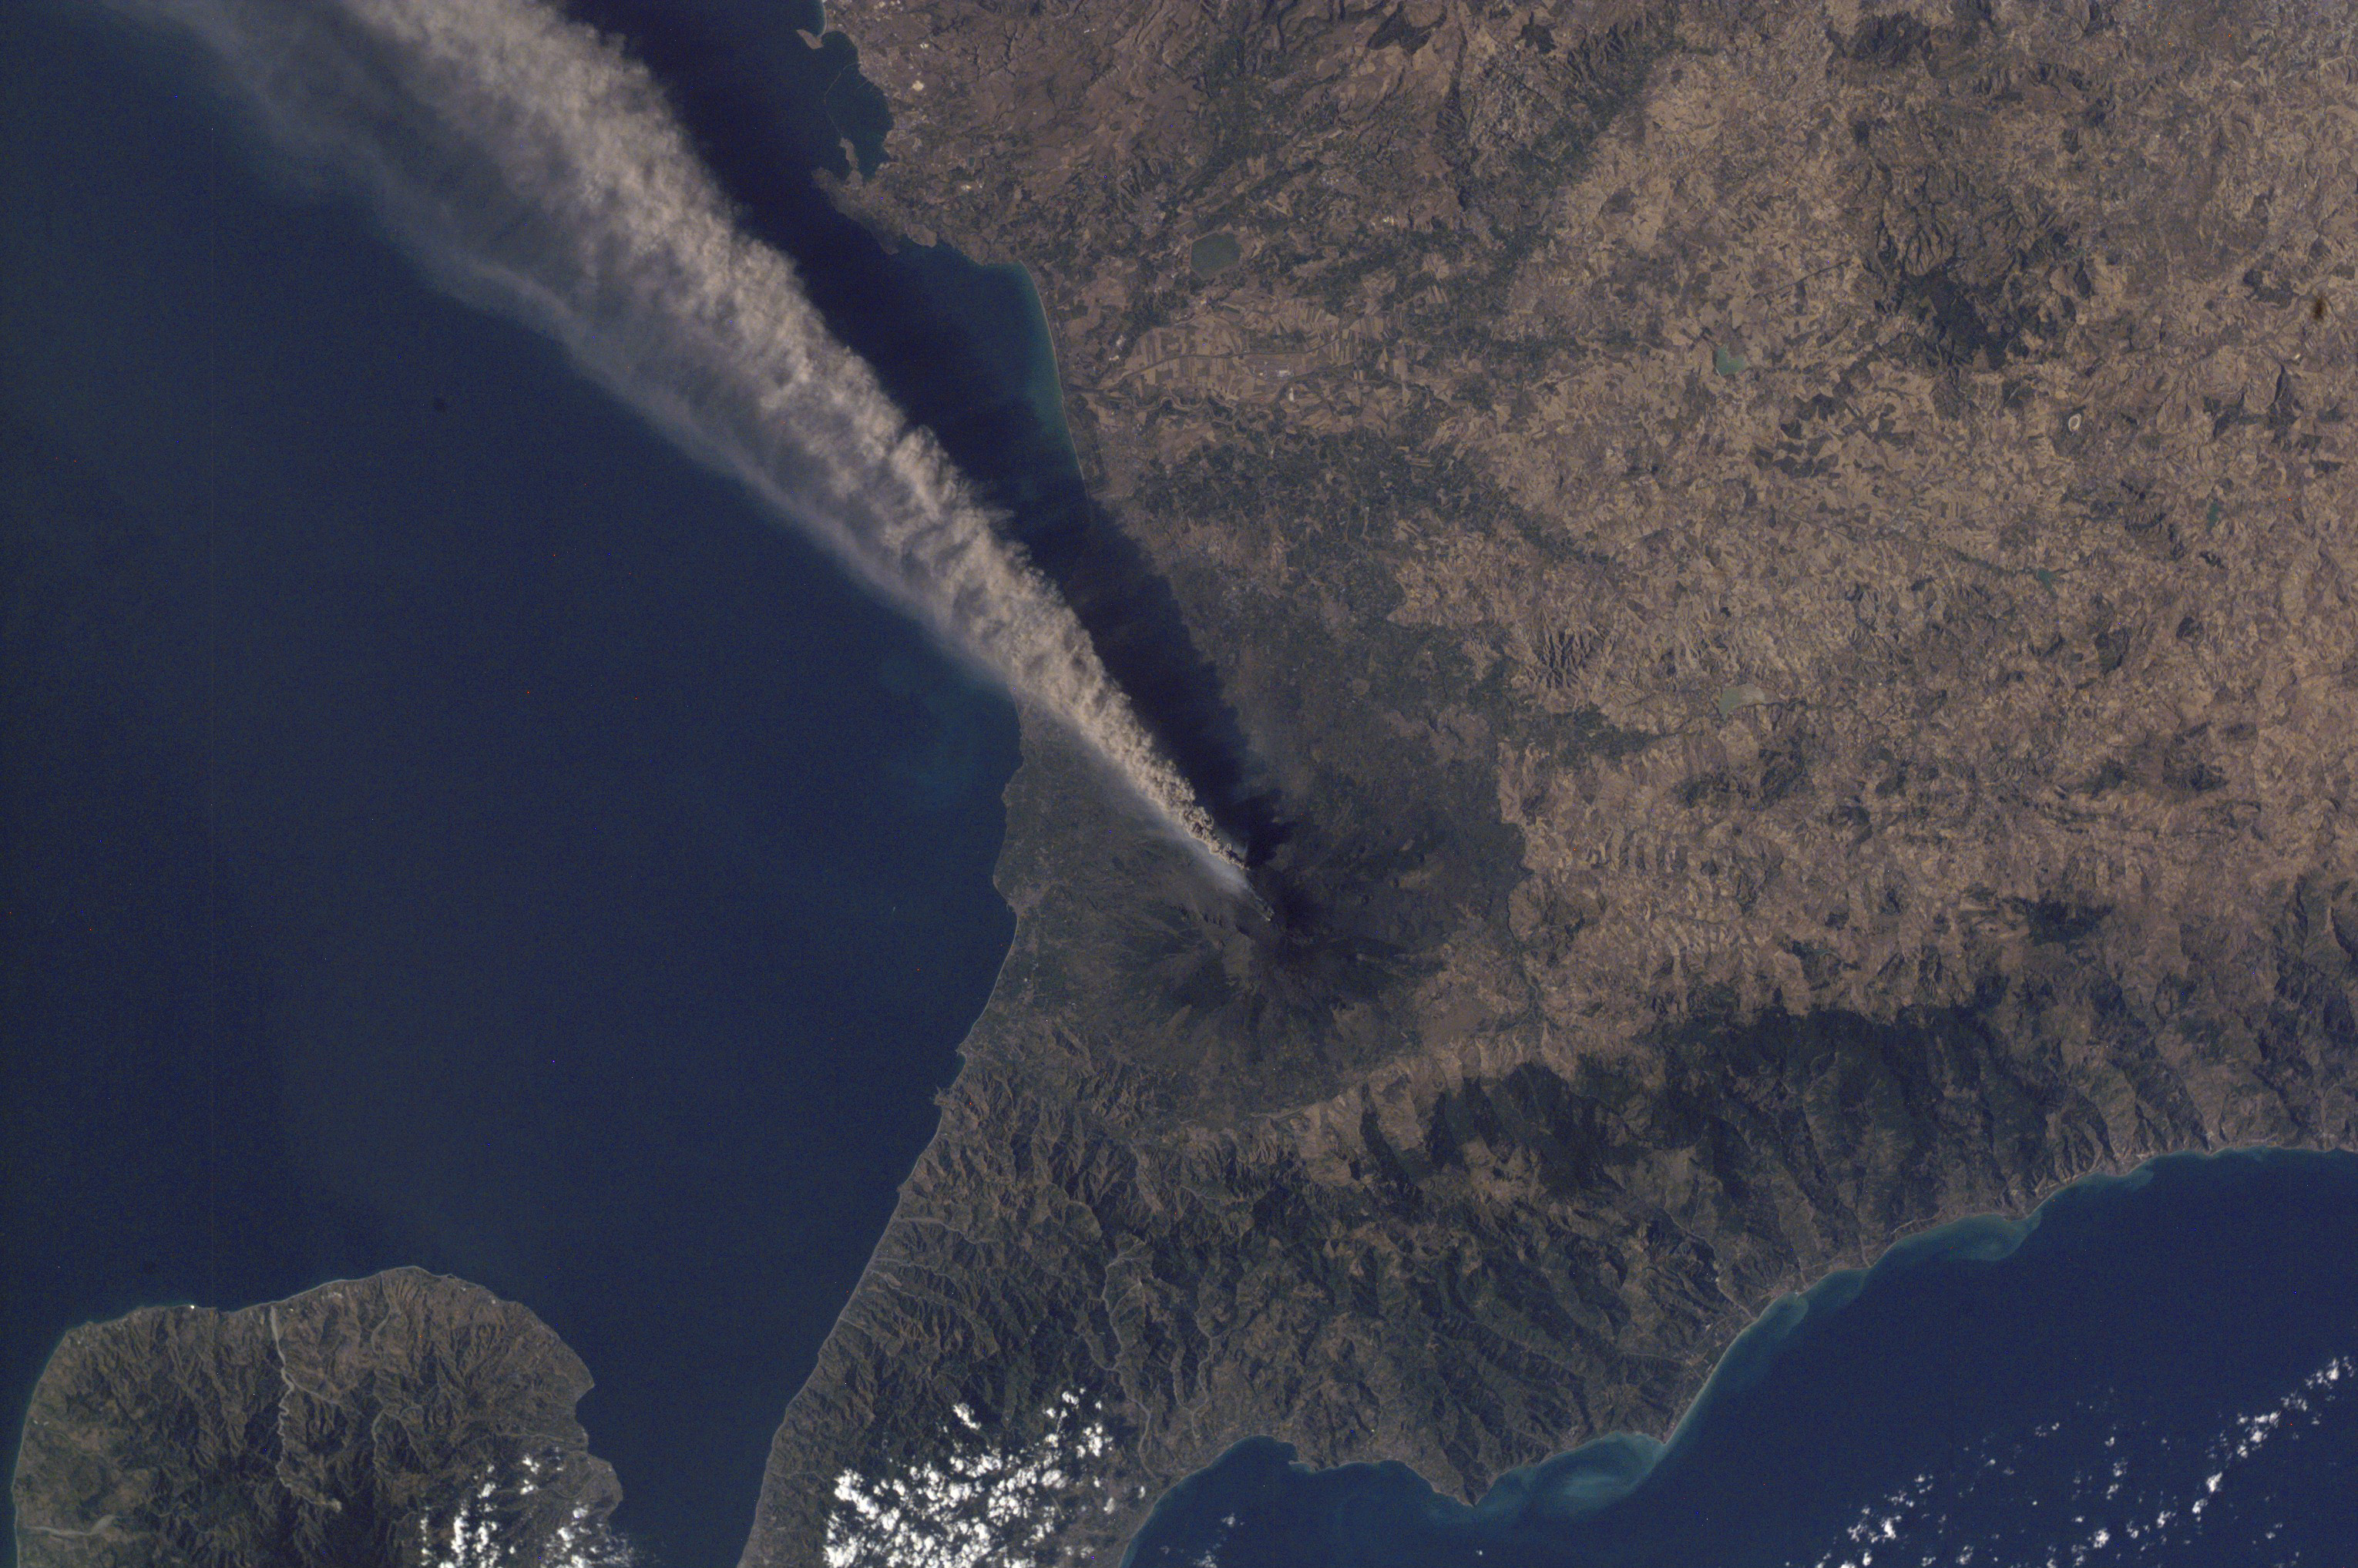 Ash Plume Streams from Mt. Etna, Sicily - related image preview